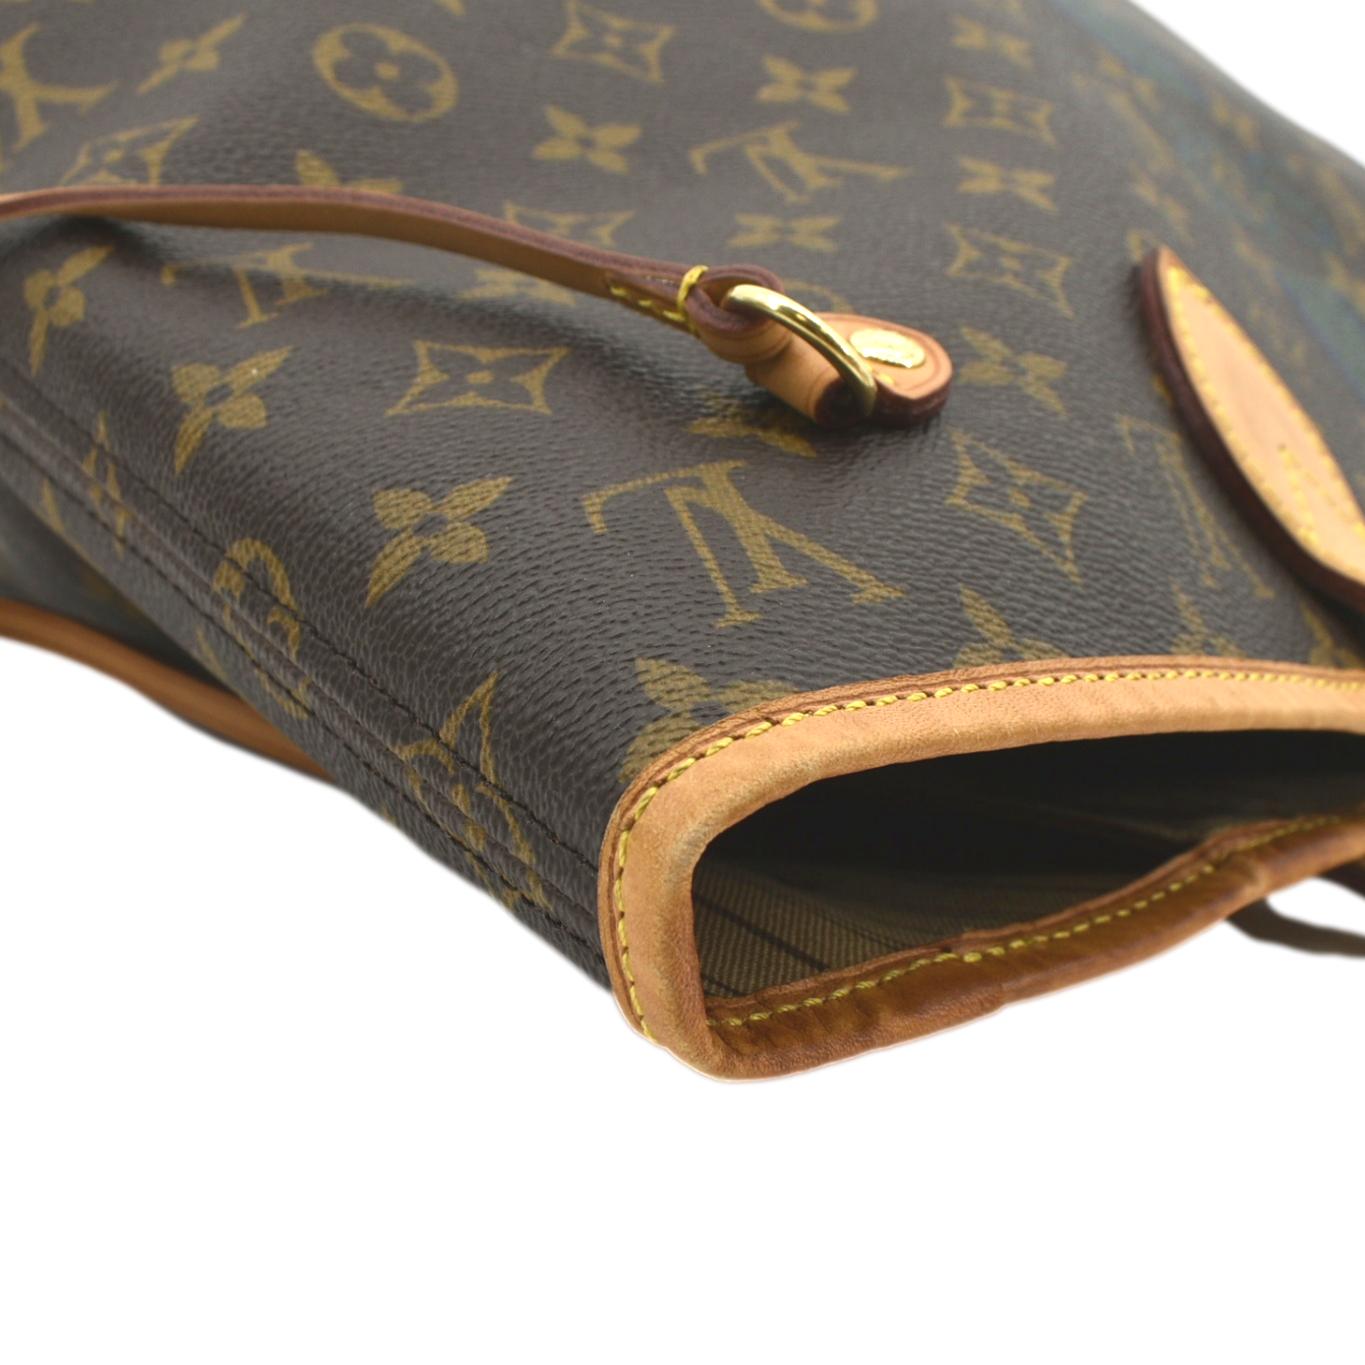 Louis Vuitton Neverfull GM My LV Heritage